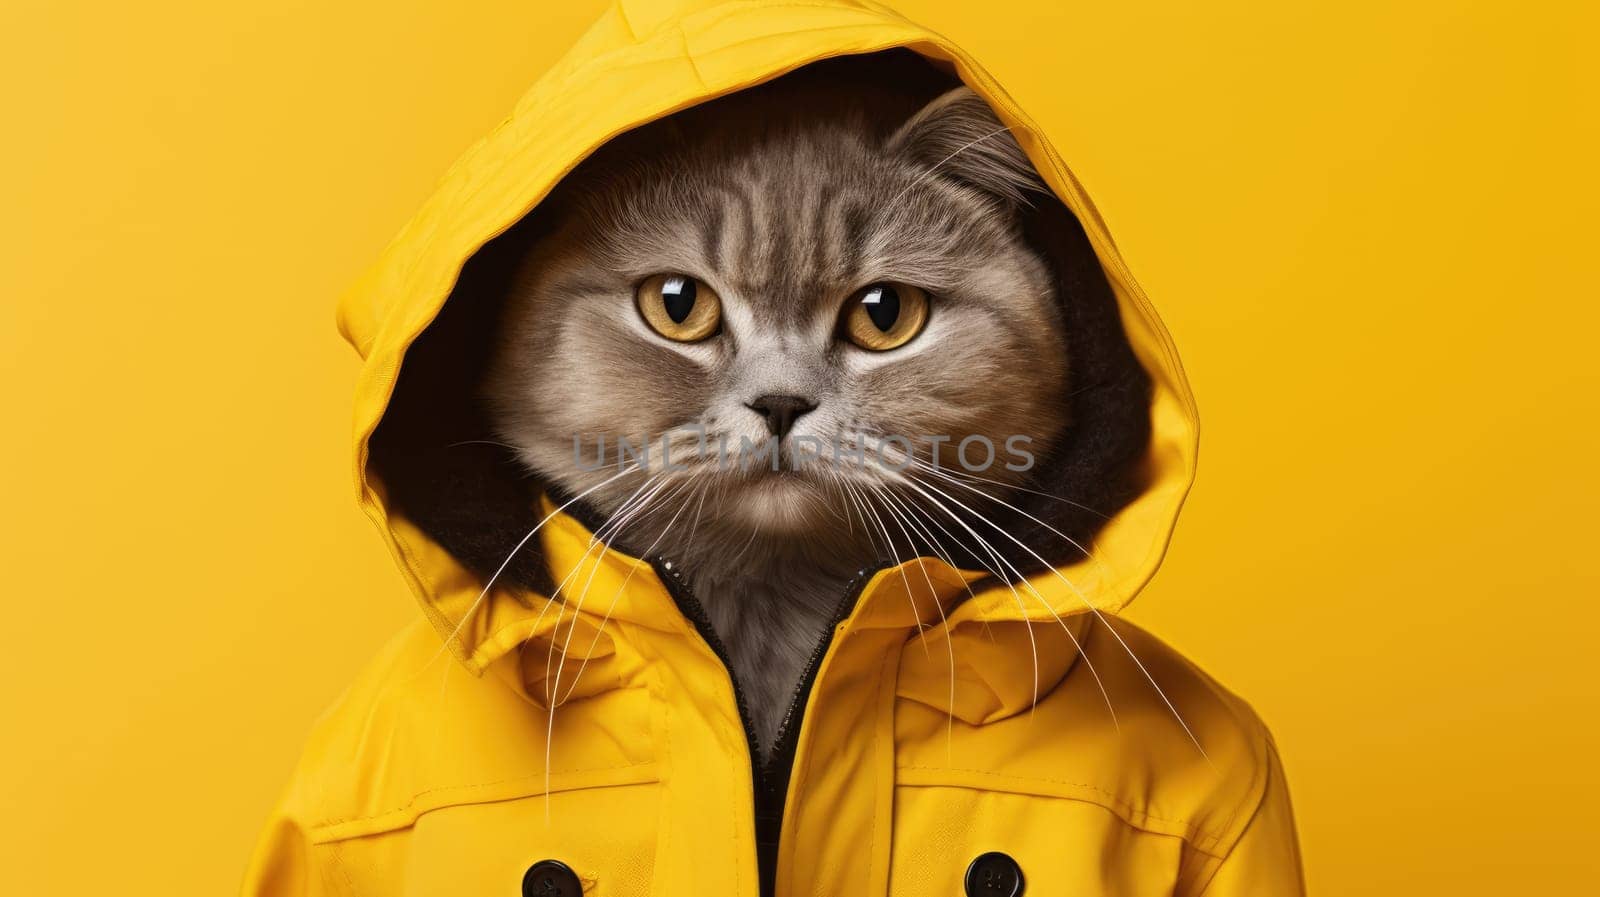 Hipster cat in a coat on a yellow background by natali_brill